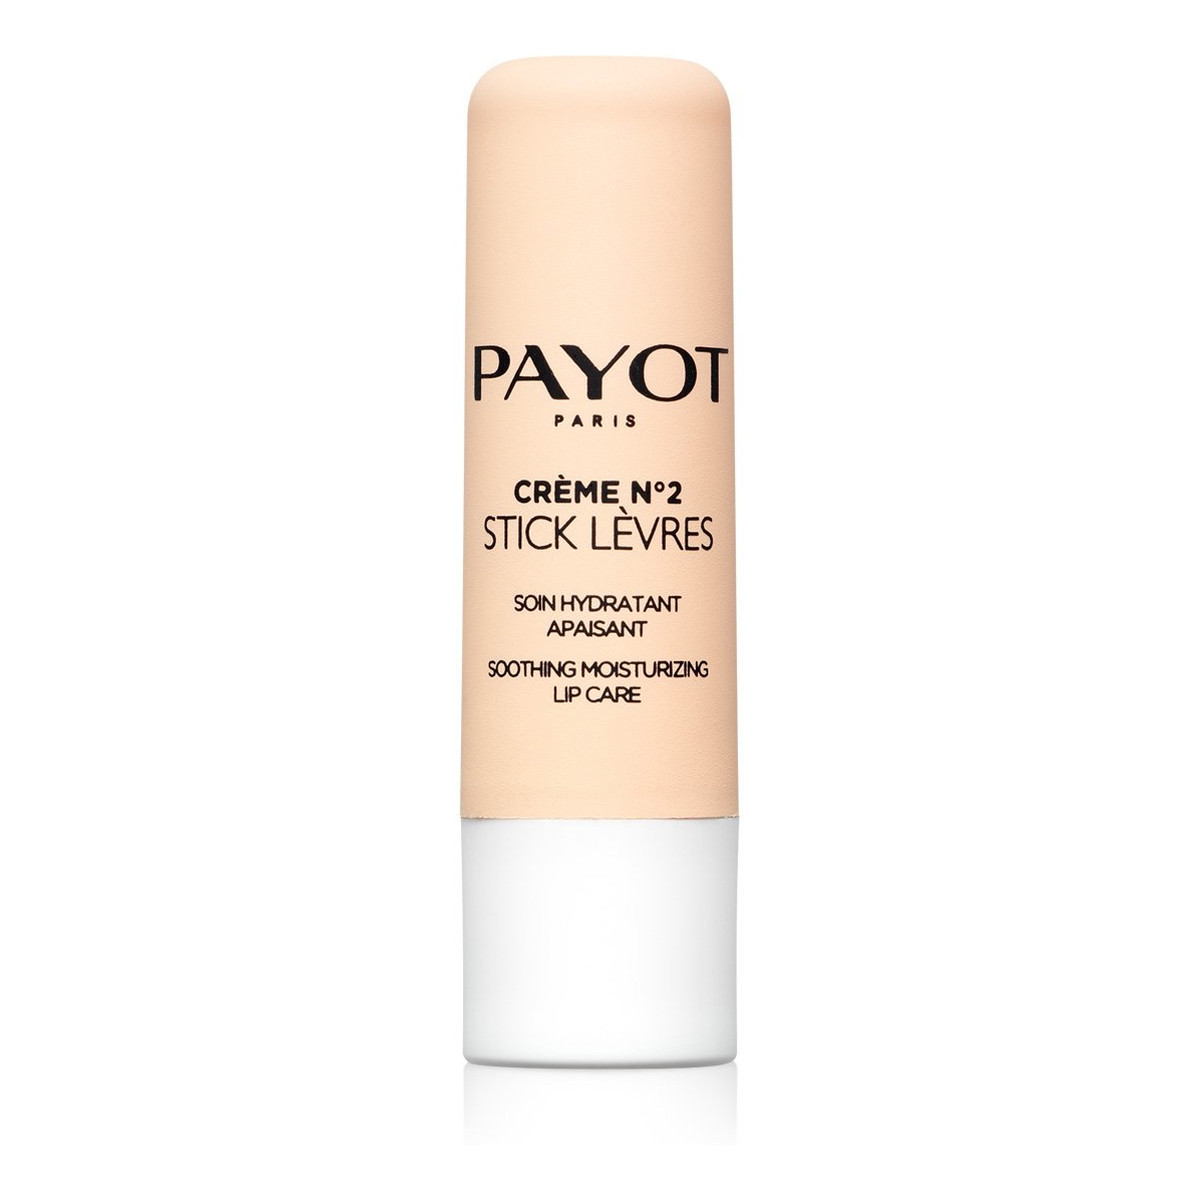 Payot Creme No 2 Stick Levres Balsam do ust 4g